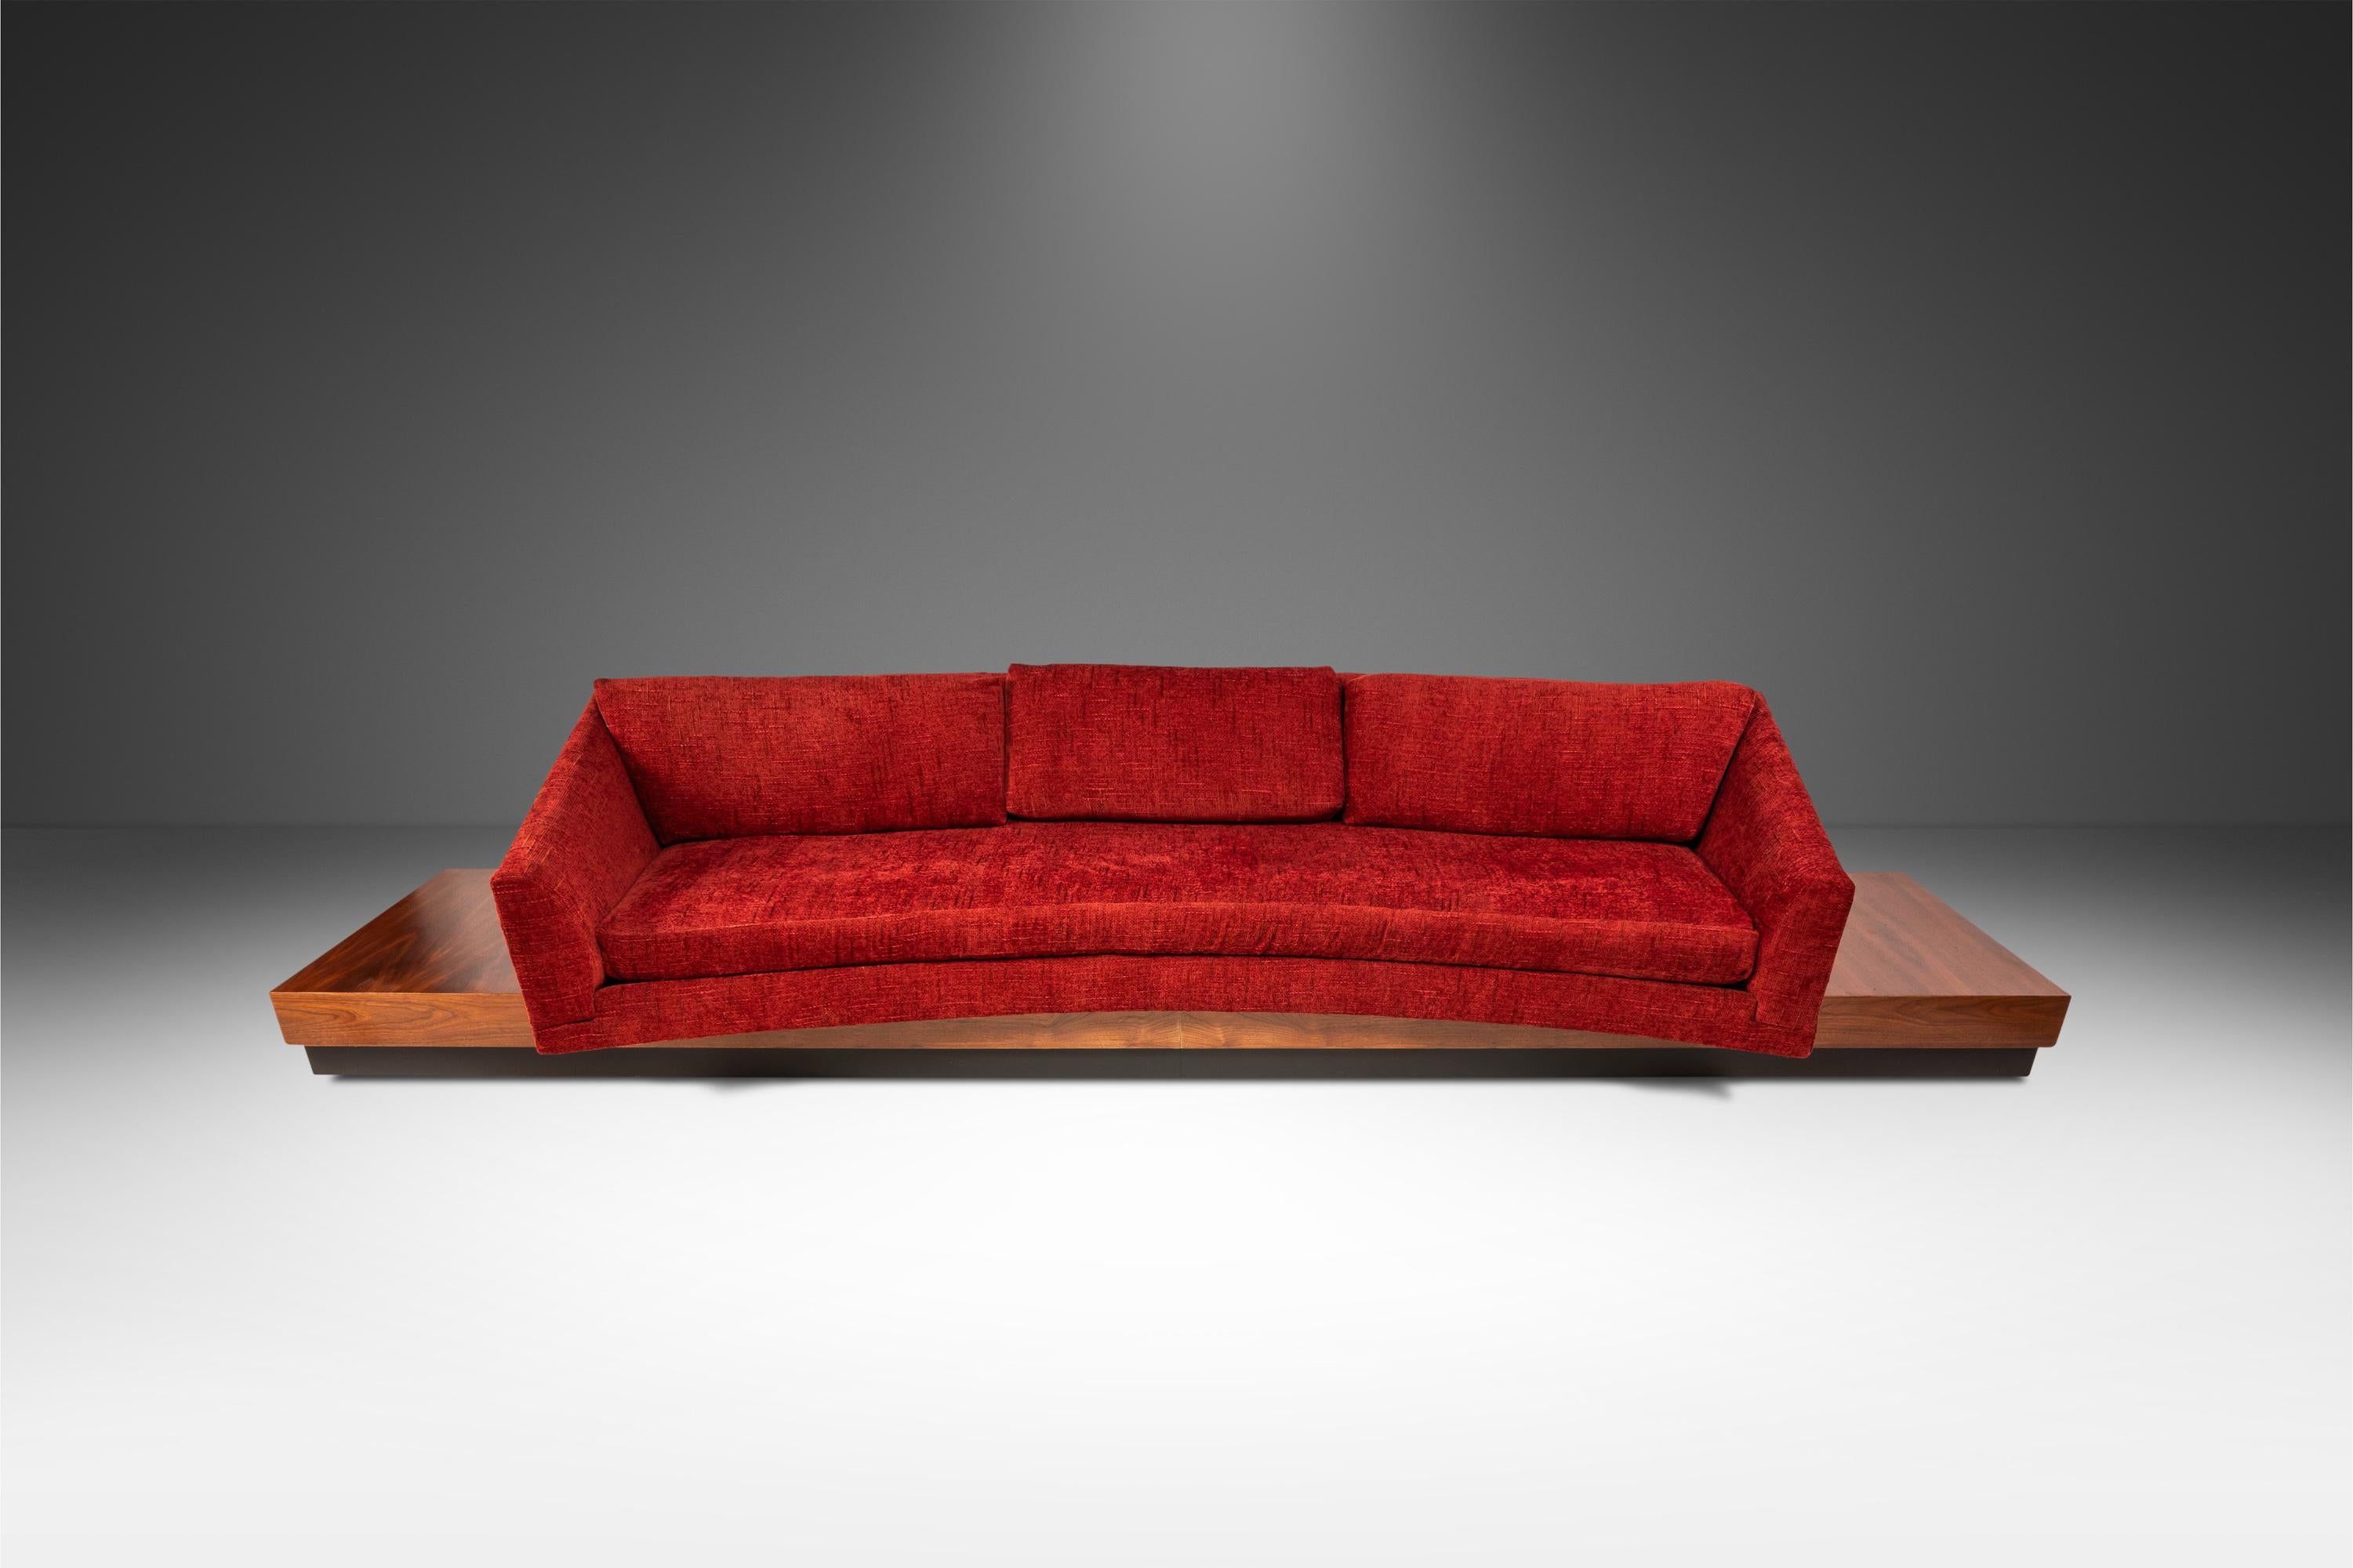 Fabric Expansive 12-Foot Platform Sofa by Adrian Pearsall for Craft Associates, 1960s For Sale